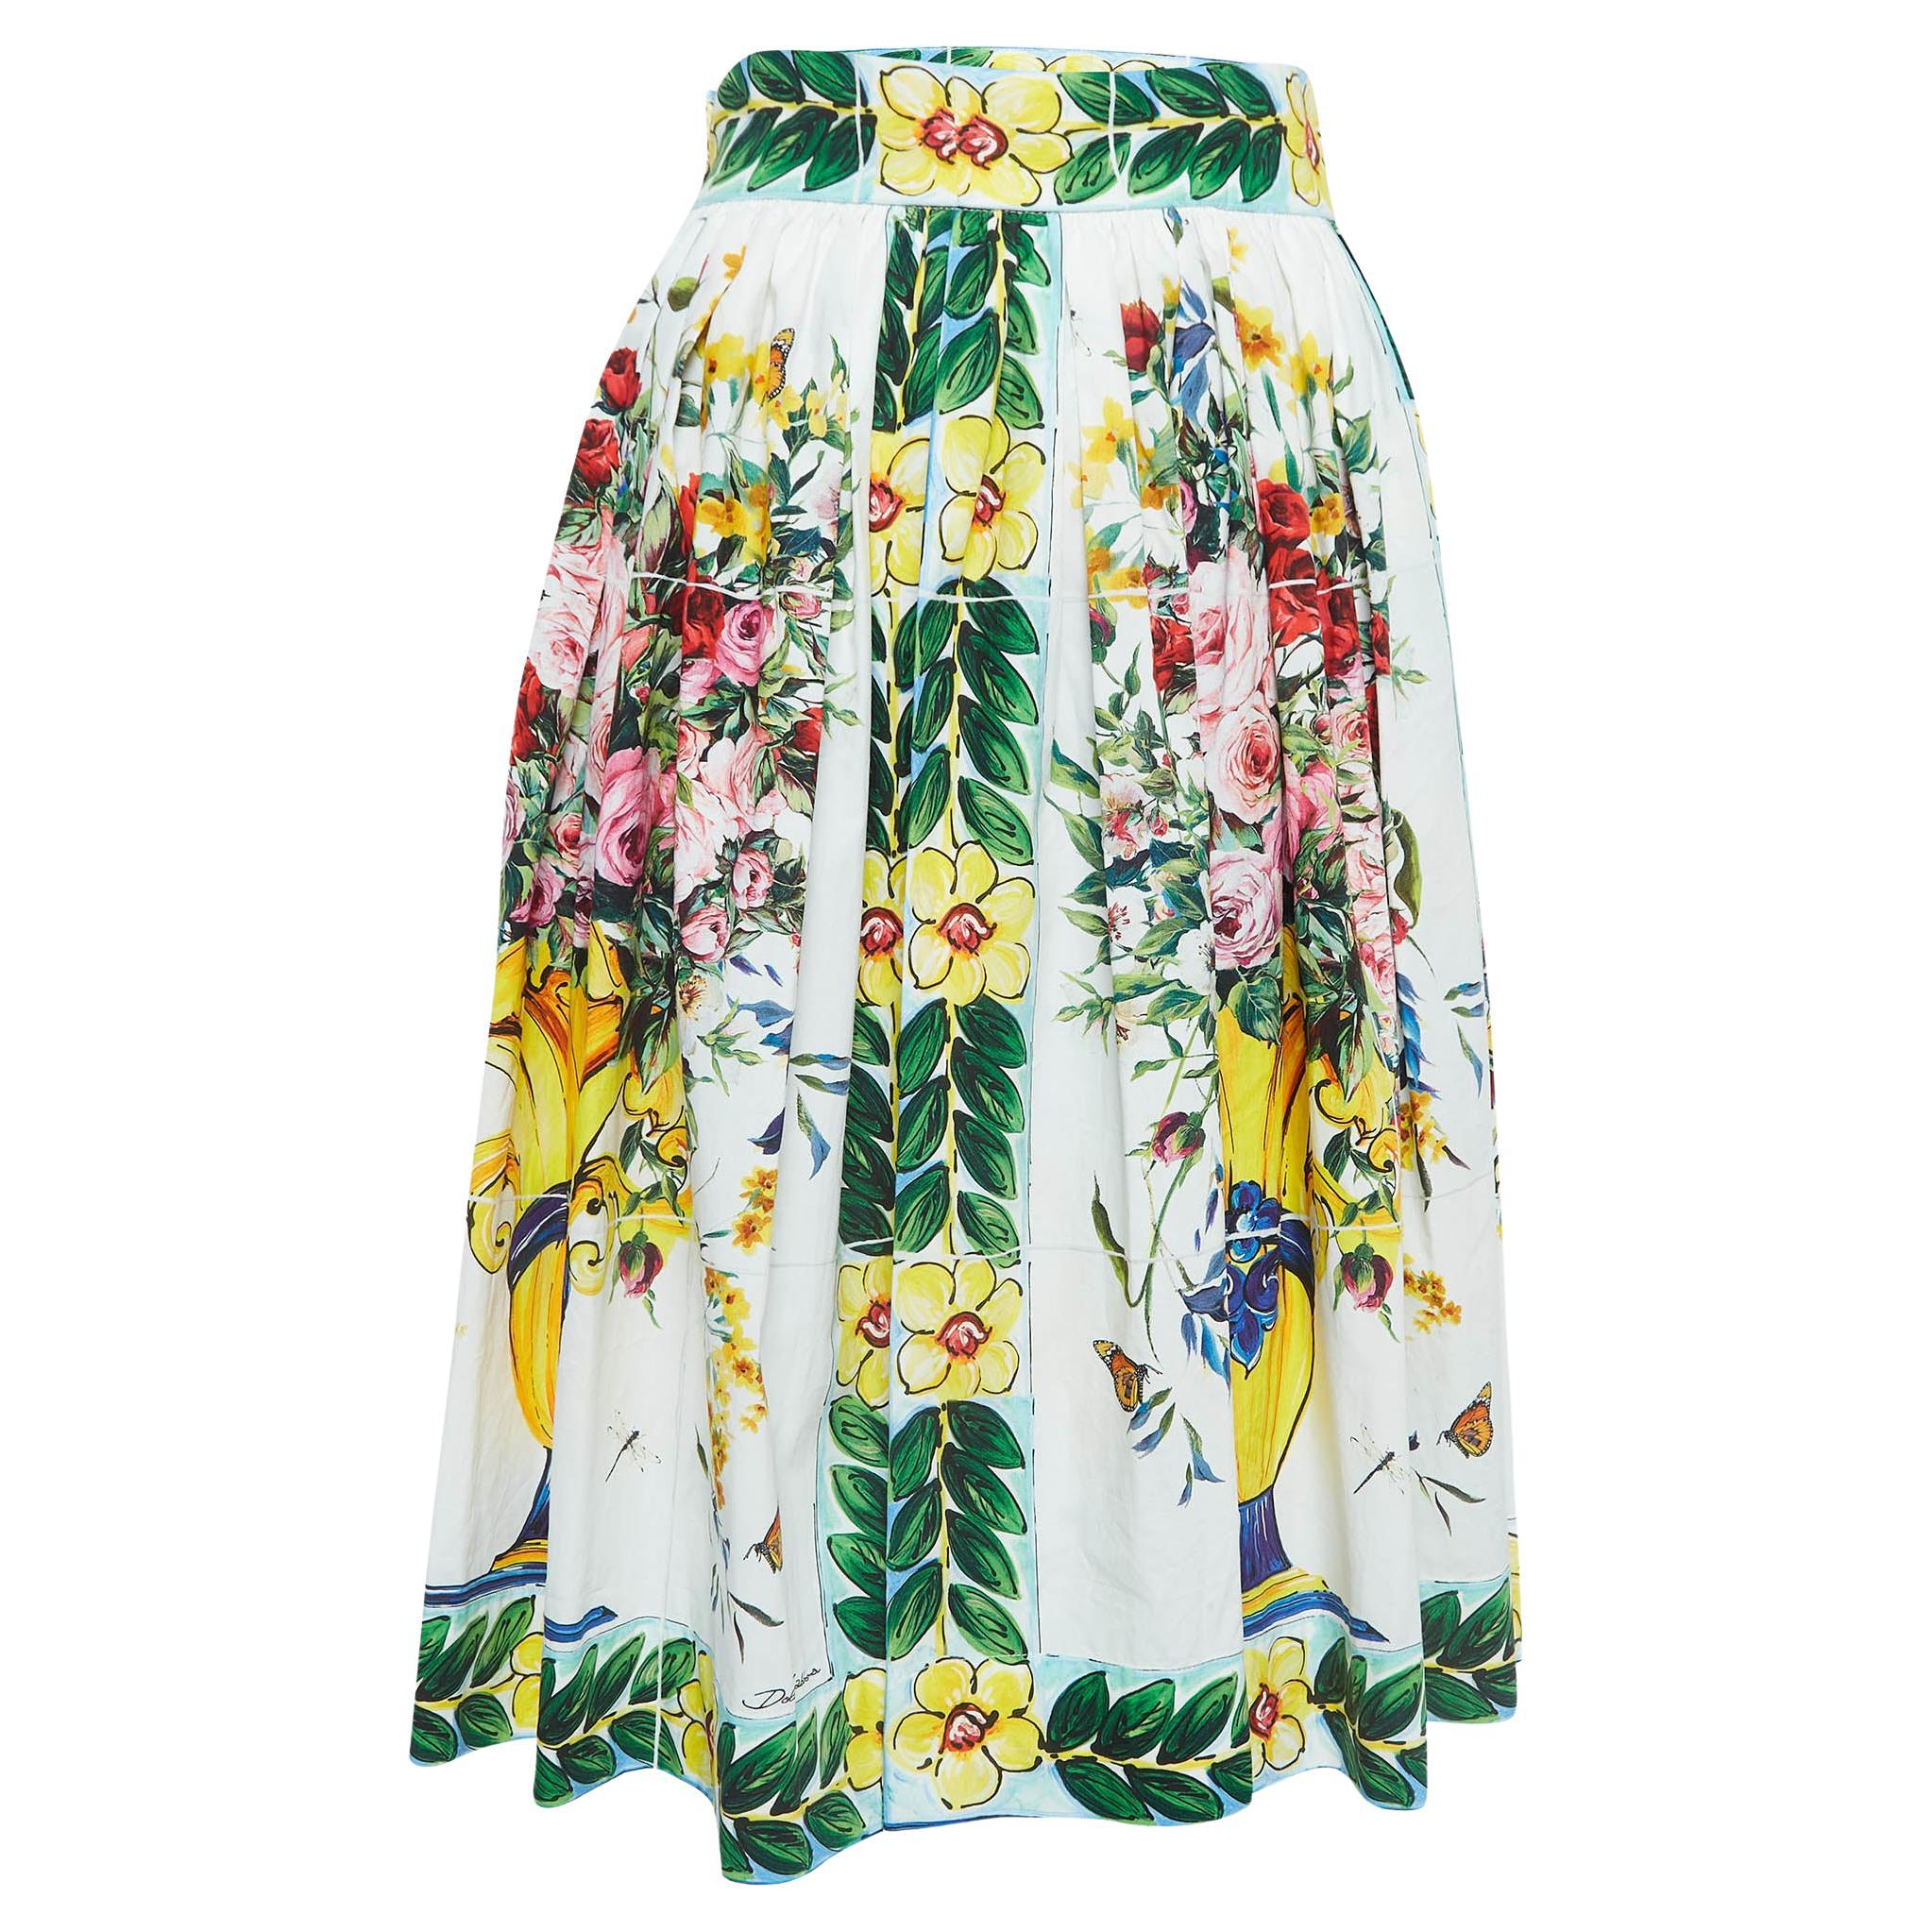 Dolce & Gabbana Multicolor Printed Cotton Flared Skirt S